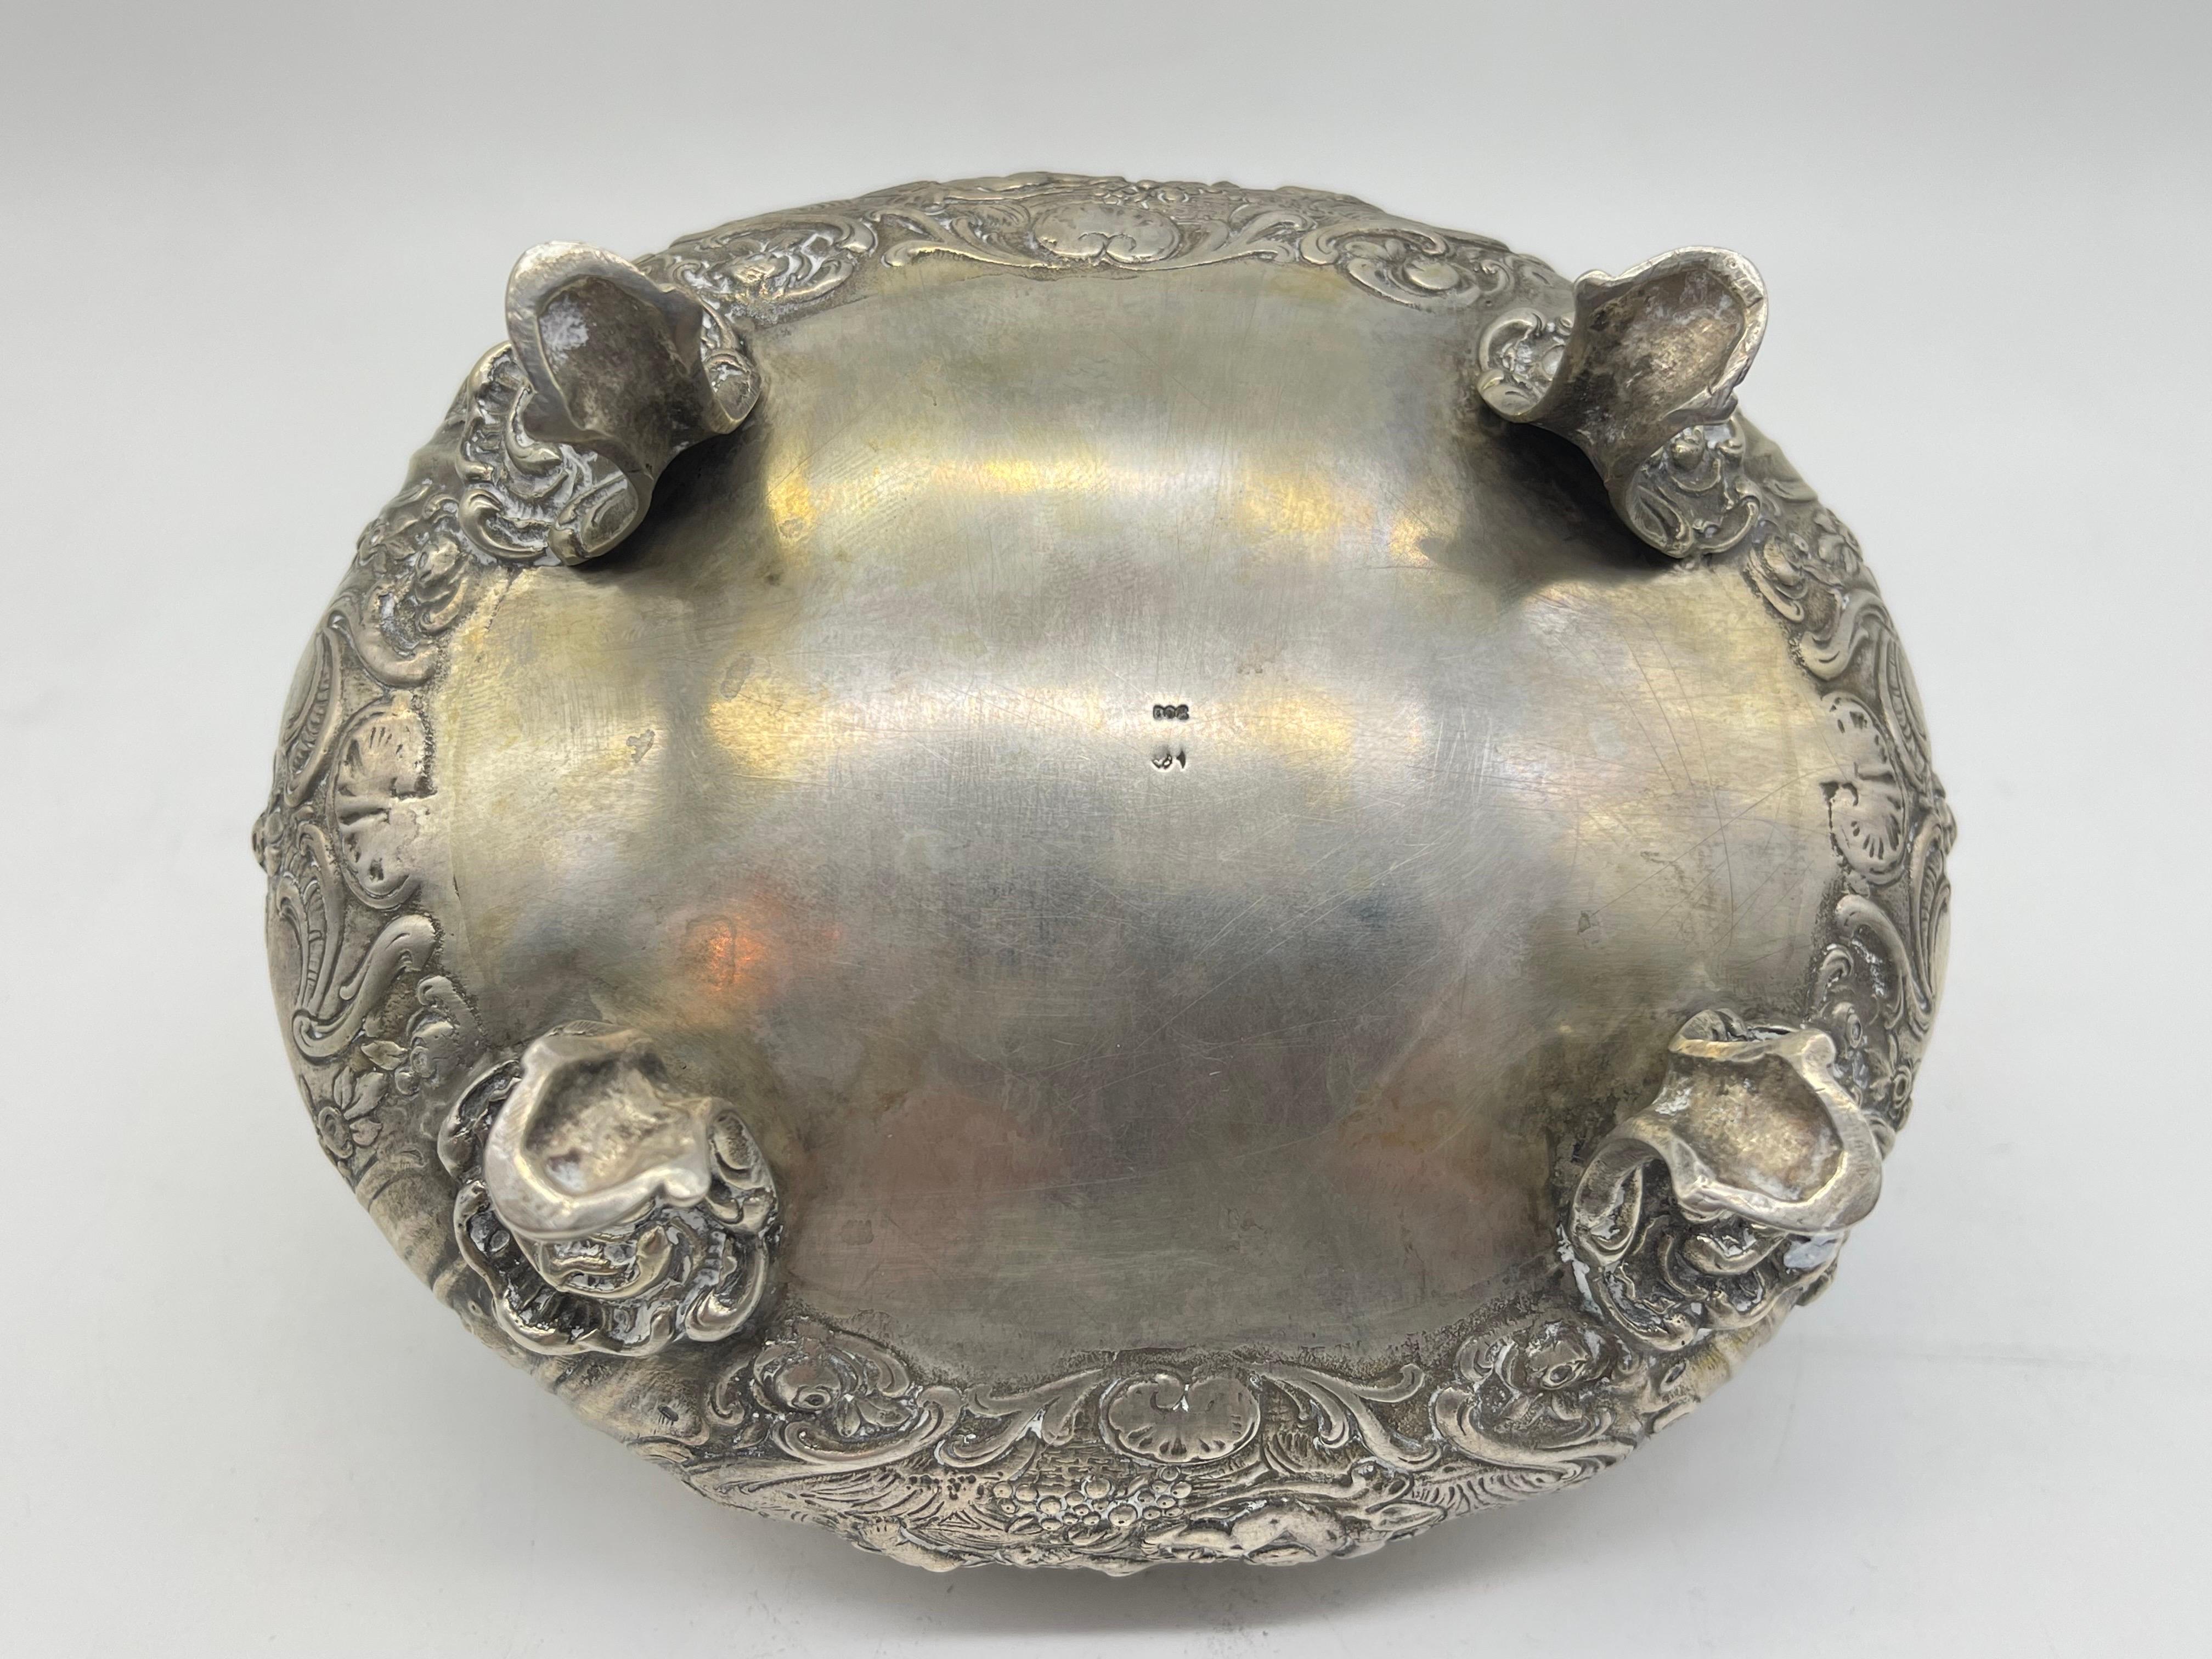 Exclusive Bonboniere / Sugar Lidded box 800 Silver Germany gilded, Flowers Putto For Sale 15